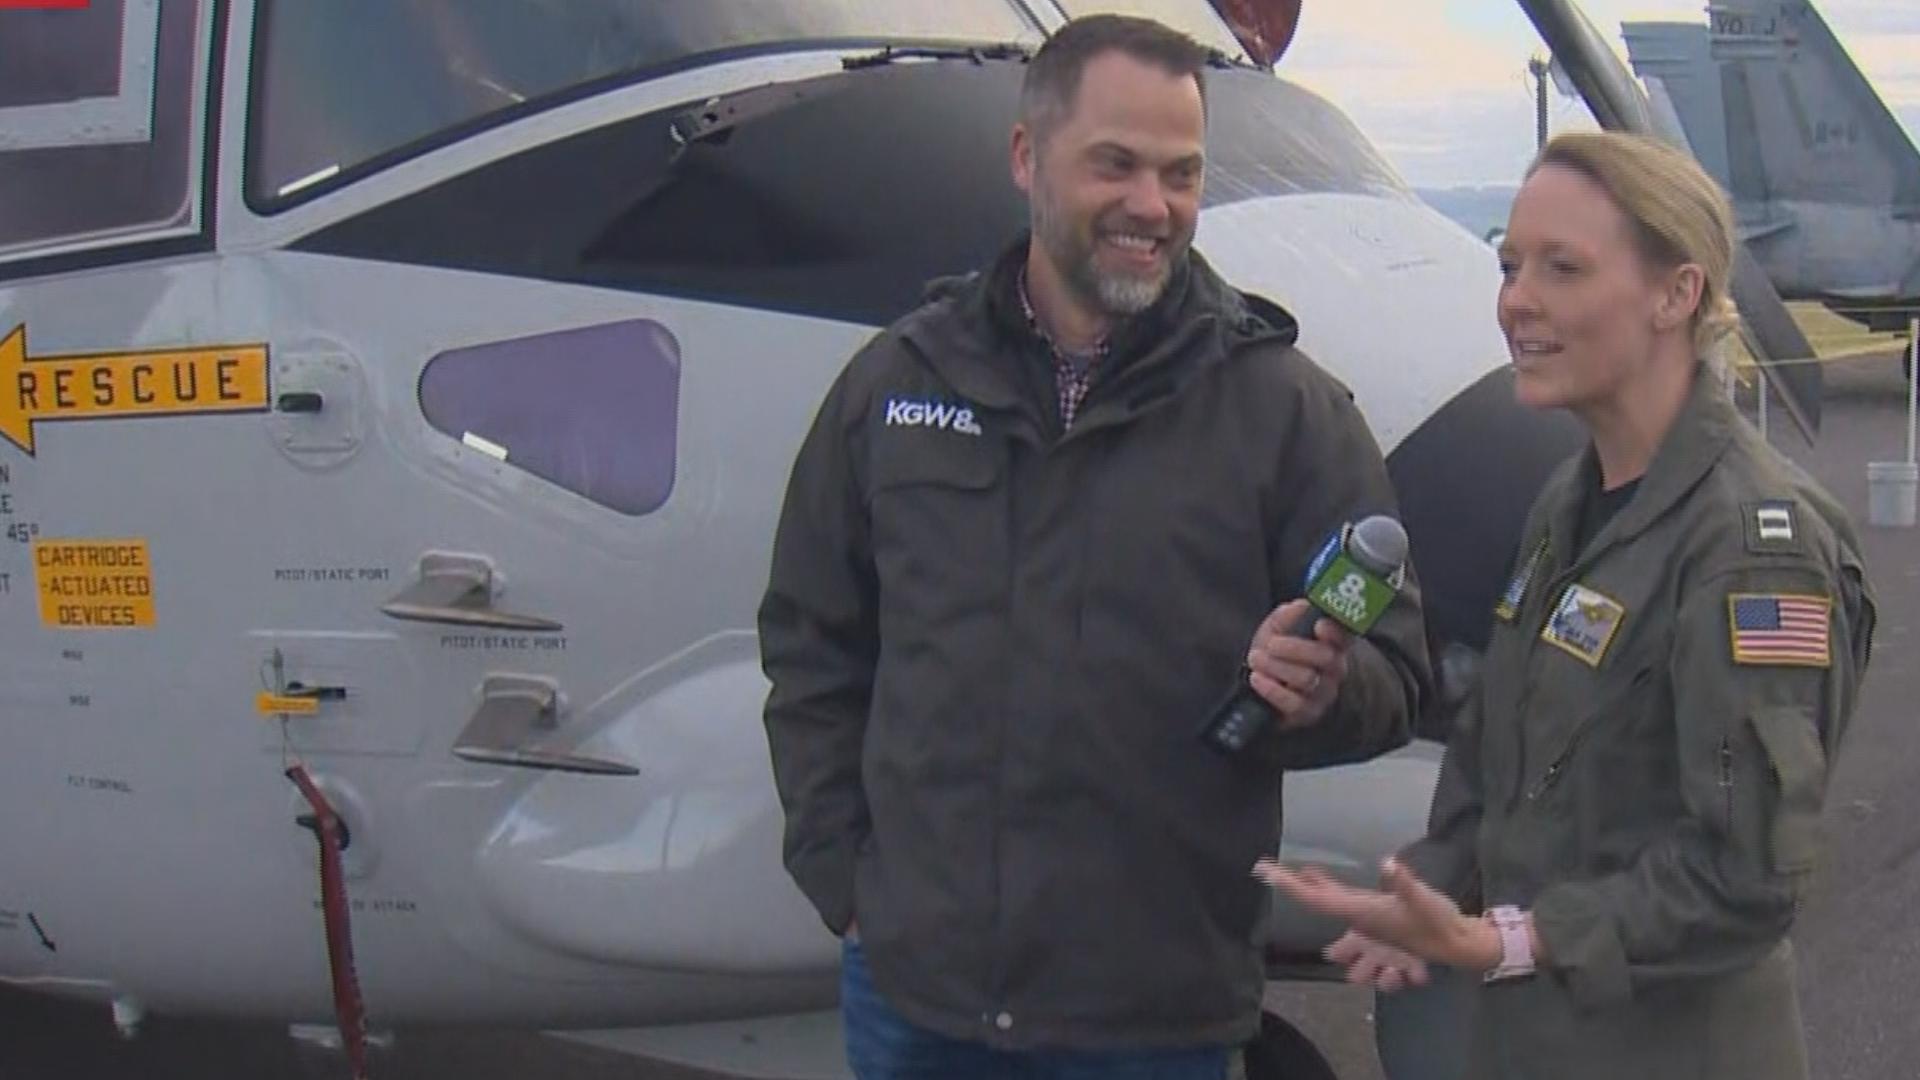 The Oregon International Air Show returns to the Hillsboro Airport this weekend for the first time since 2018. This year, the air show is led by an all-women team.